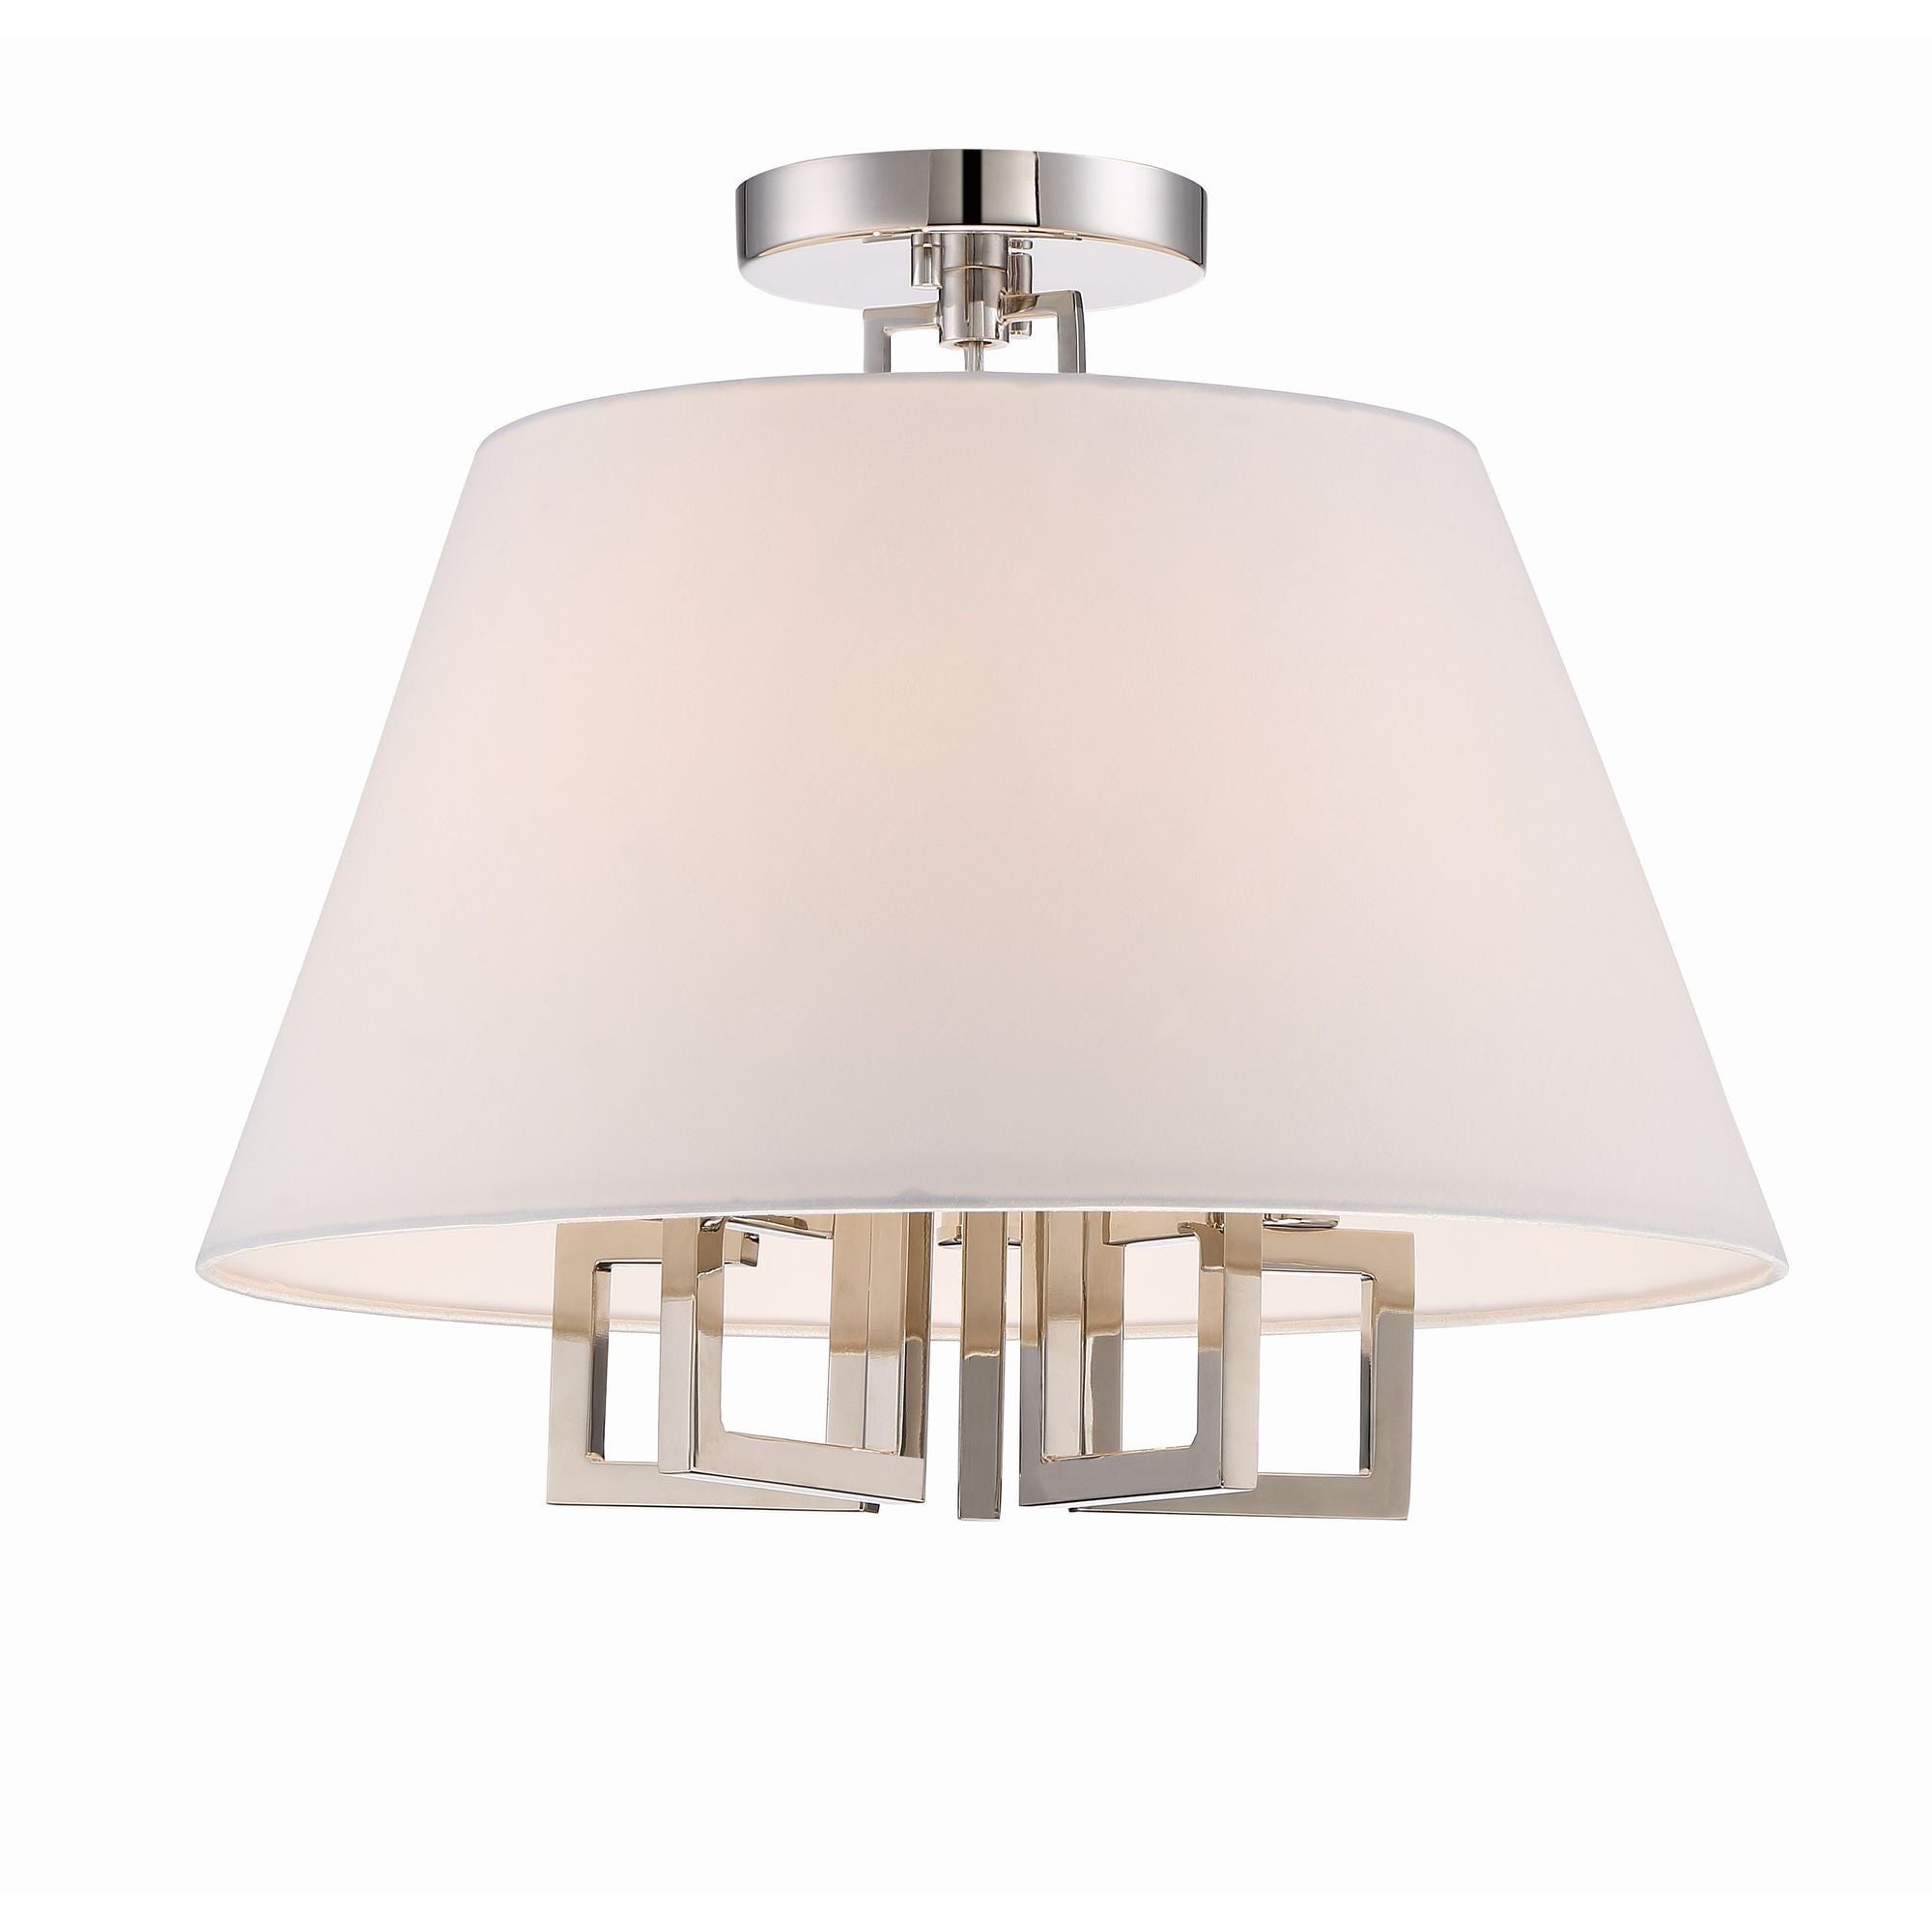 Libby Langdon for Crystorama Westwood 5 Light Polished Nickel Ceiling Mount